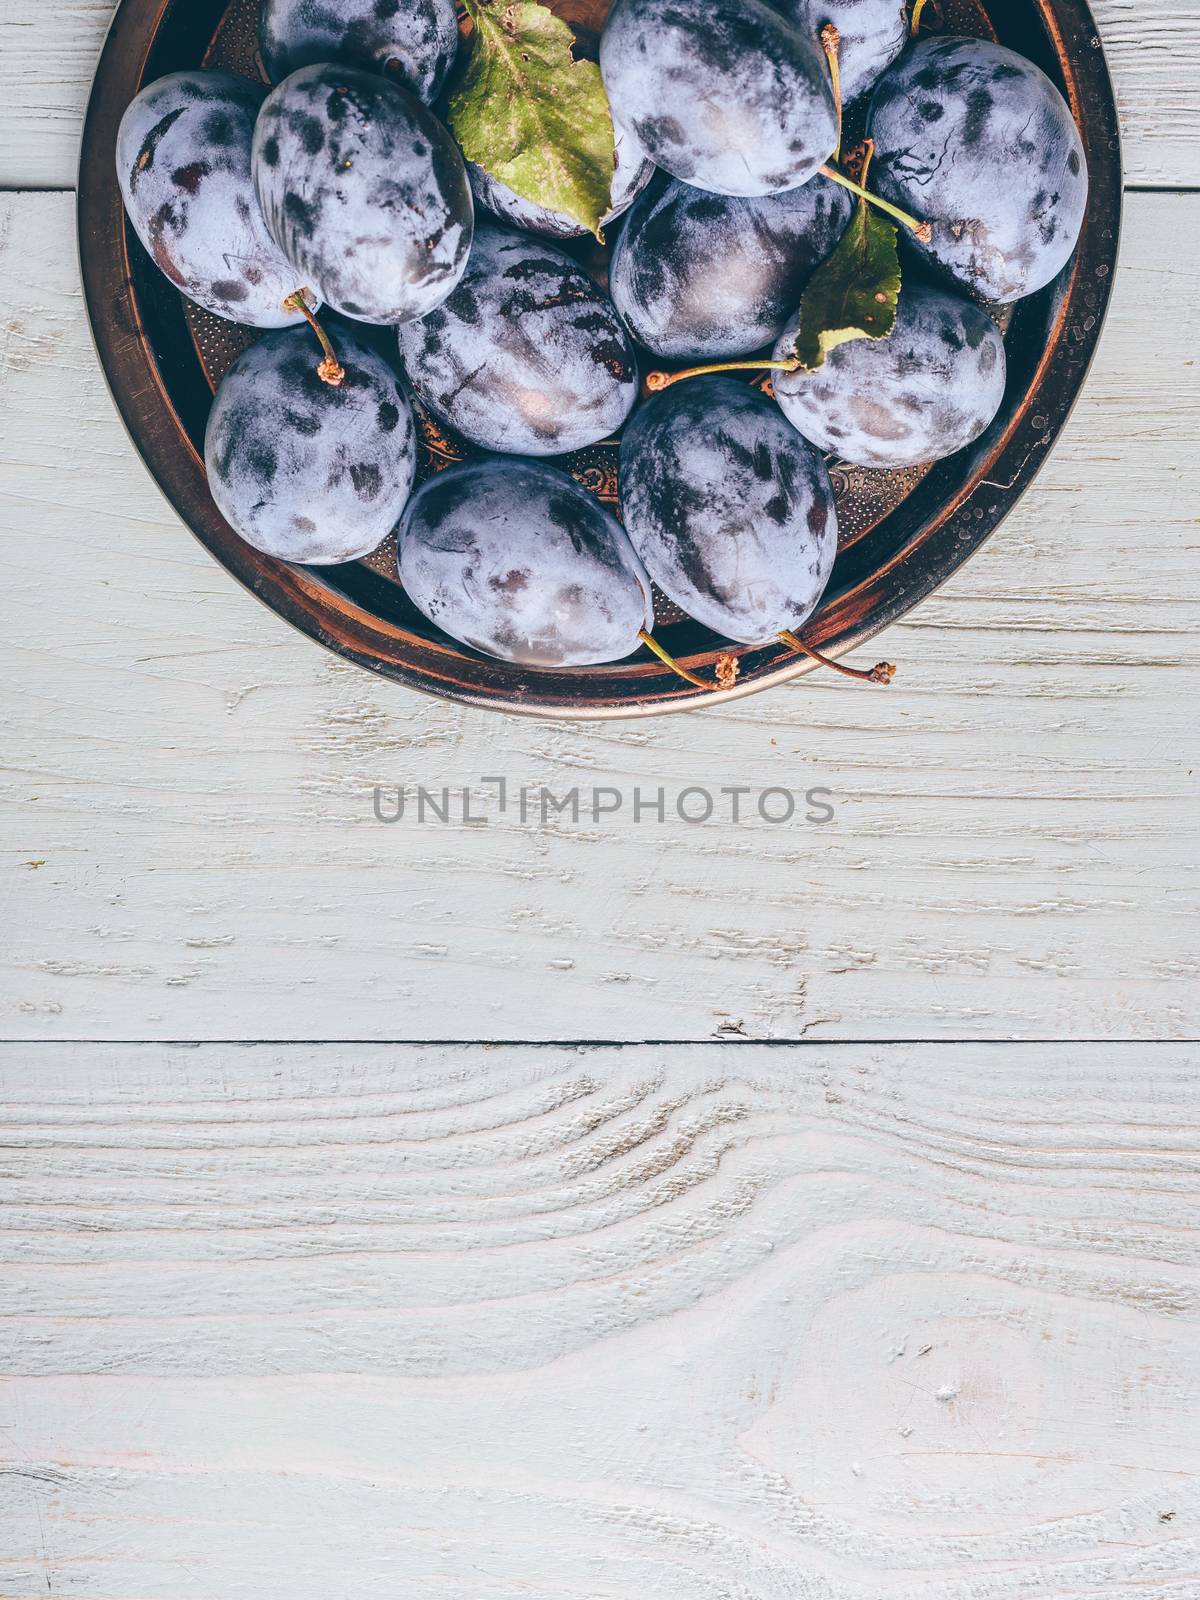 Plums on plate over wooden surface by Seva_blsv